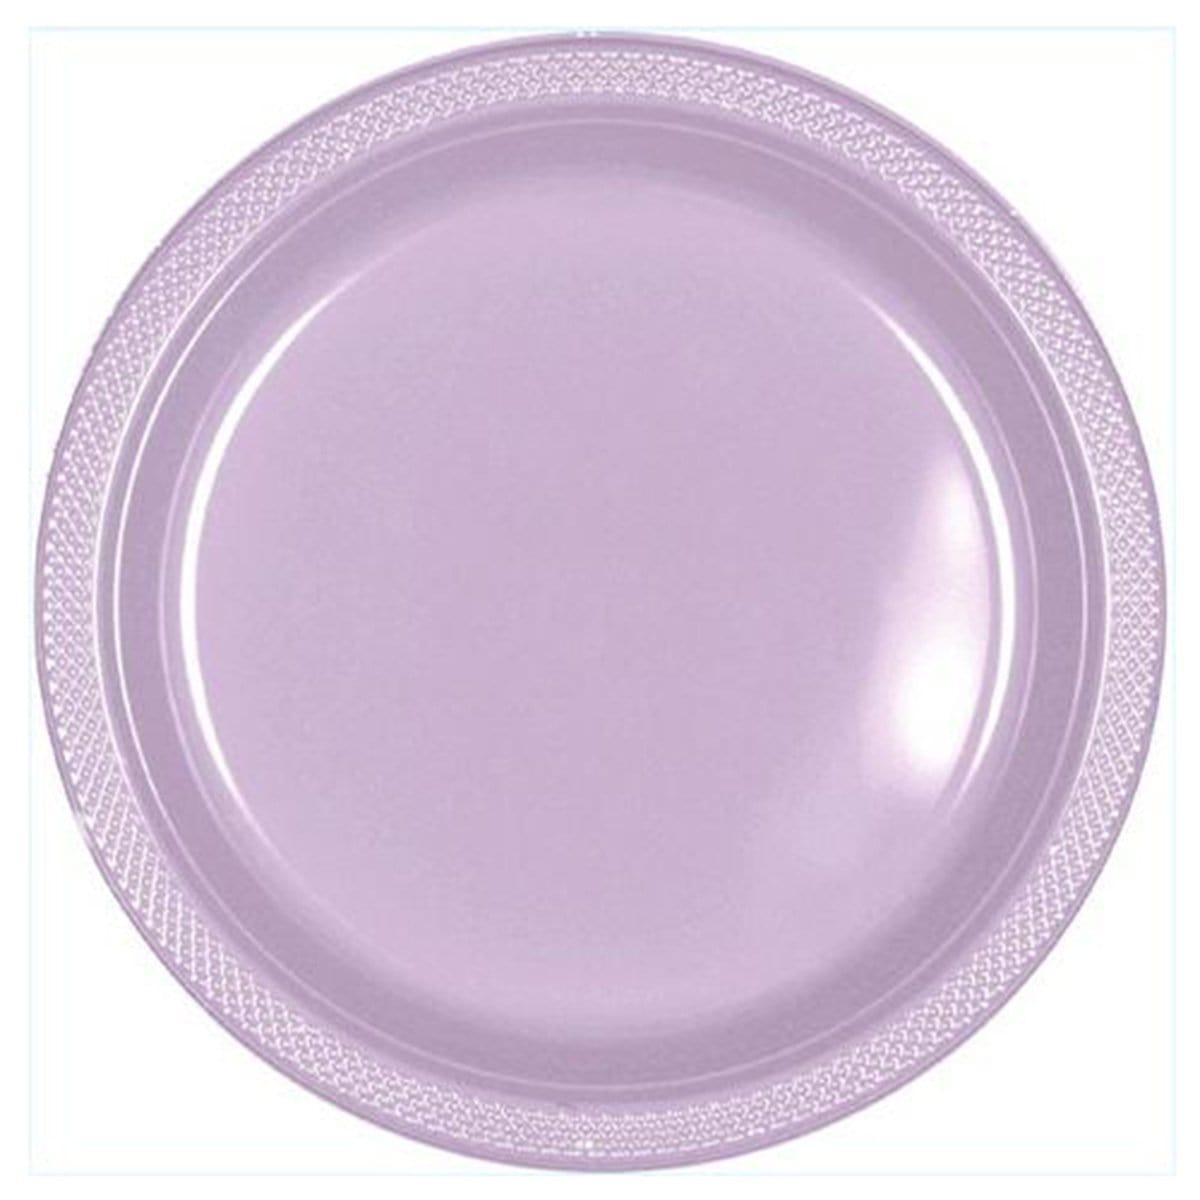 Buy Plasticware Plastic Plates - Lavender 9 in. 20/pkg sold at Party Expert